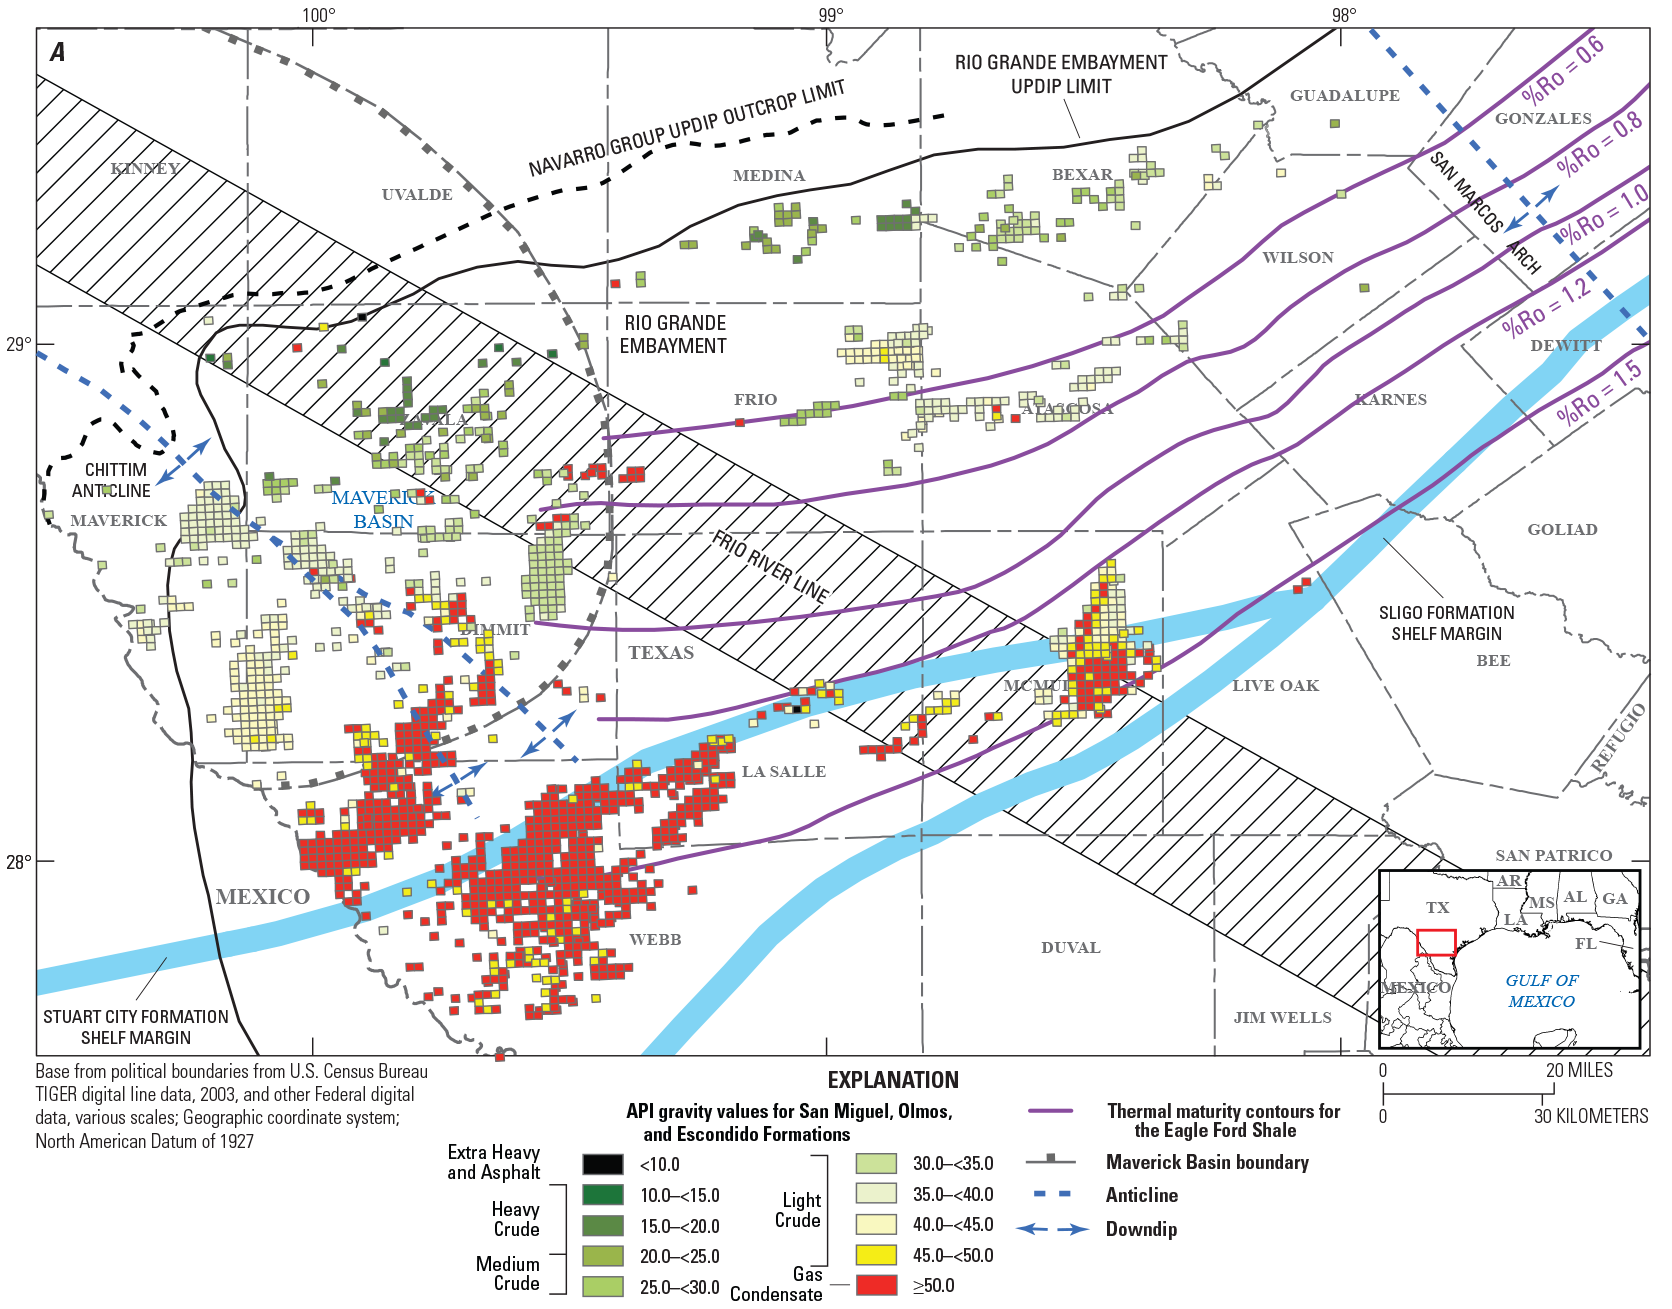 Values for API are highest in the south of the Maverick Basin and lower in the north,
                        and GOR follows a similar pattern. The Eagle Ford Shale shows a pattern of increasing
                        vitrinite reflectance from northwest to southeast.